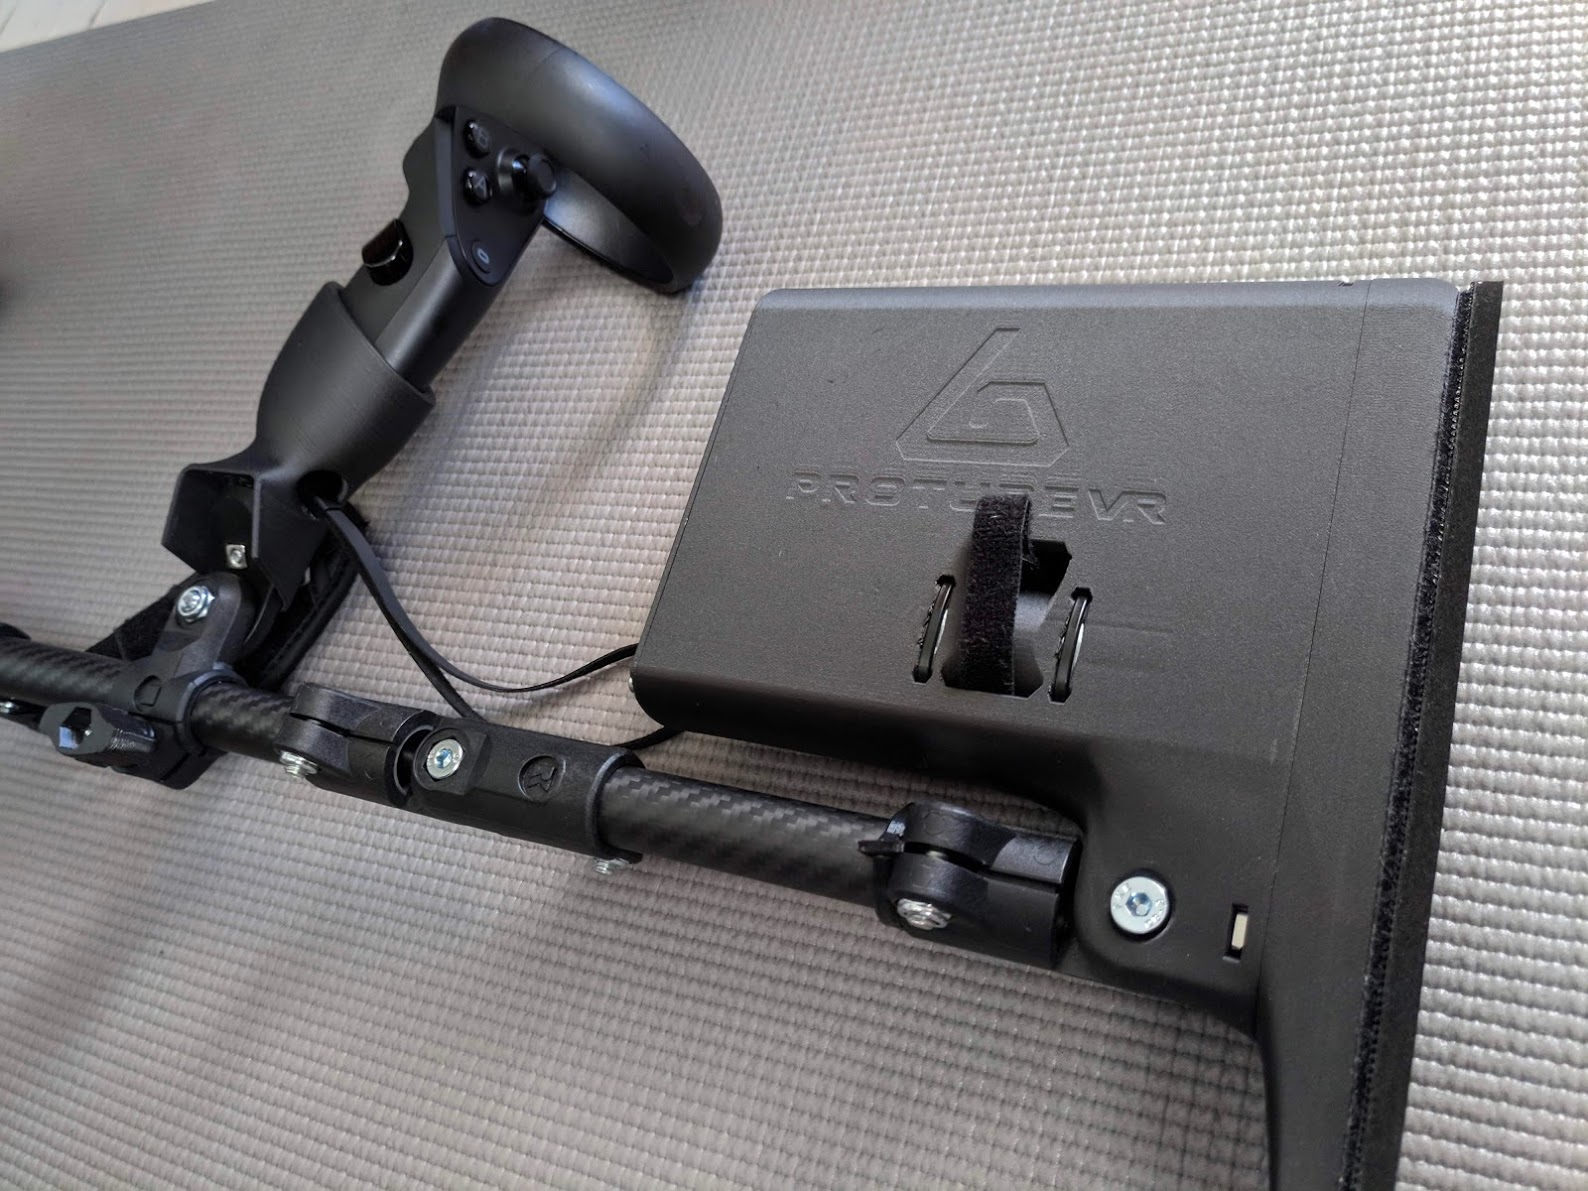 ProTubeVR VR Gunstock Review (Hardware) - Official GBAtemp Review | GBAtemp.net - The Independent Game Community